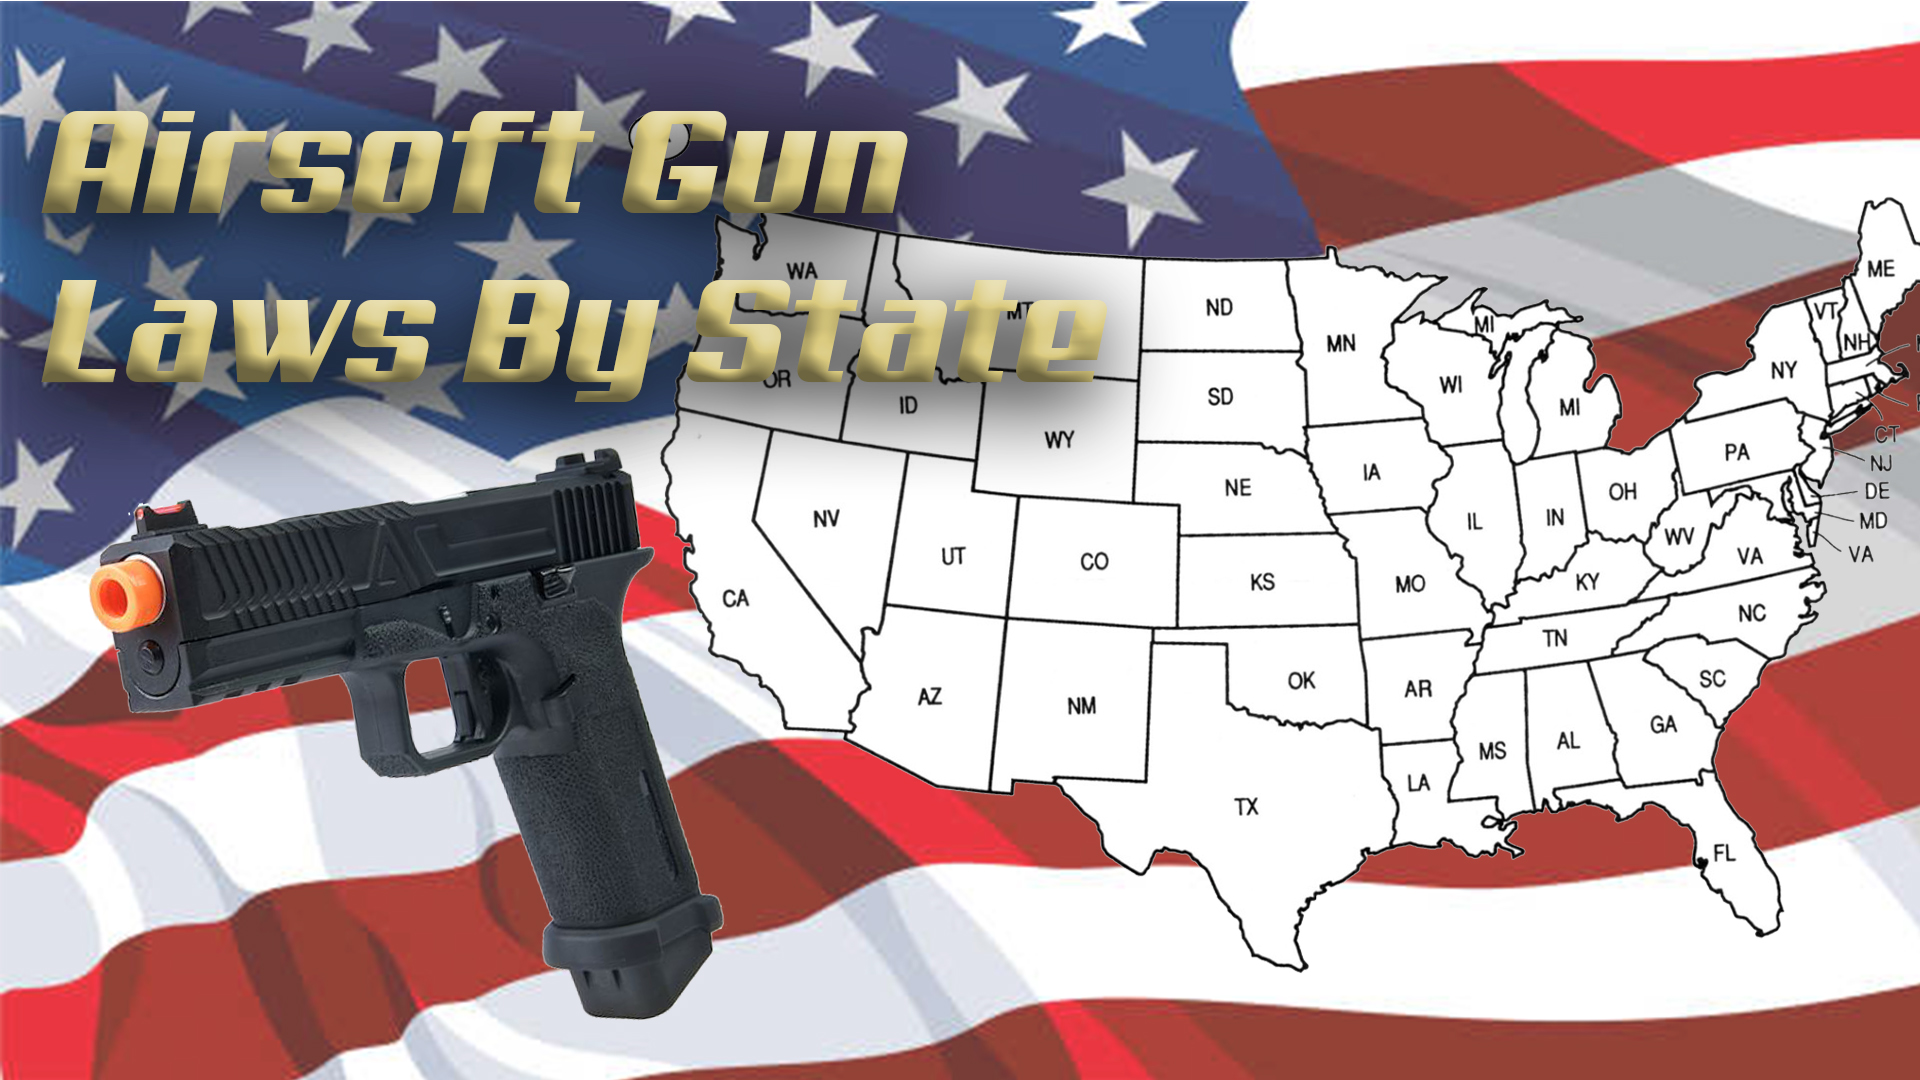 Airsoft gun laws by state - how old do you have to be to play